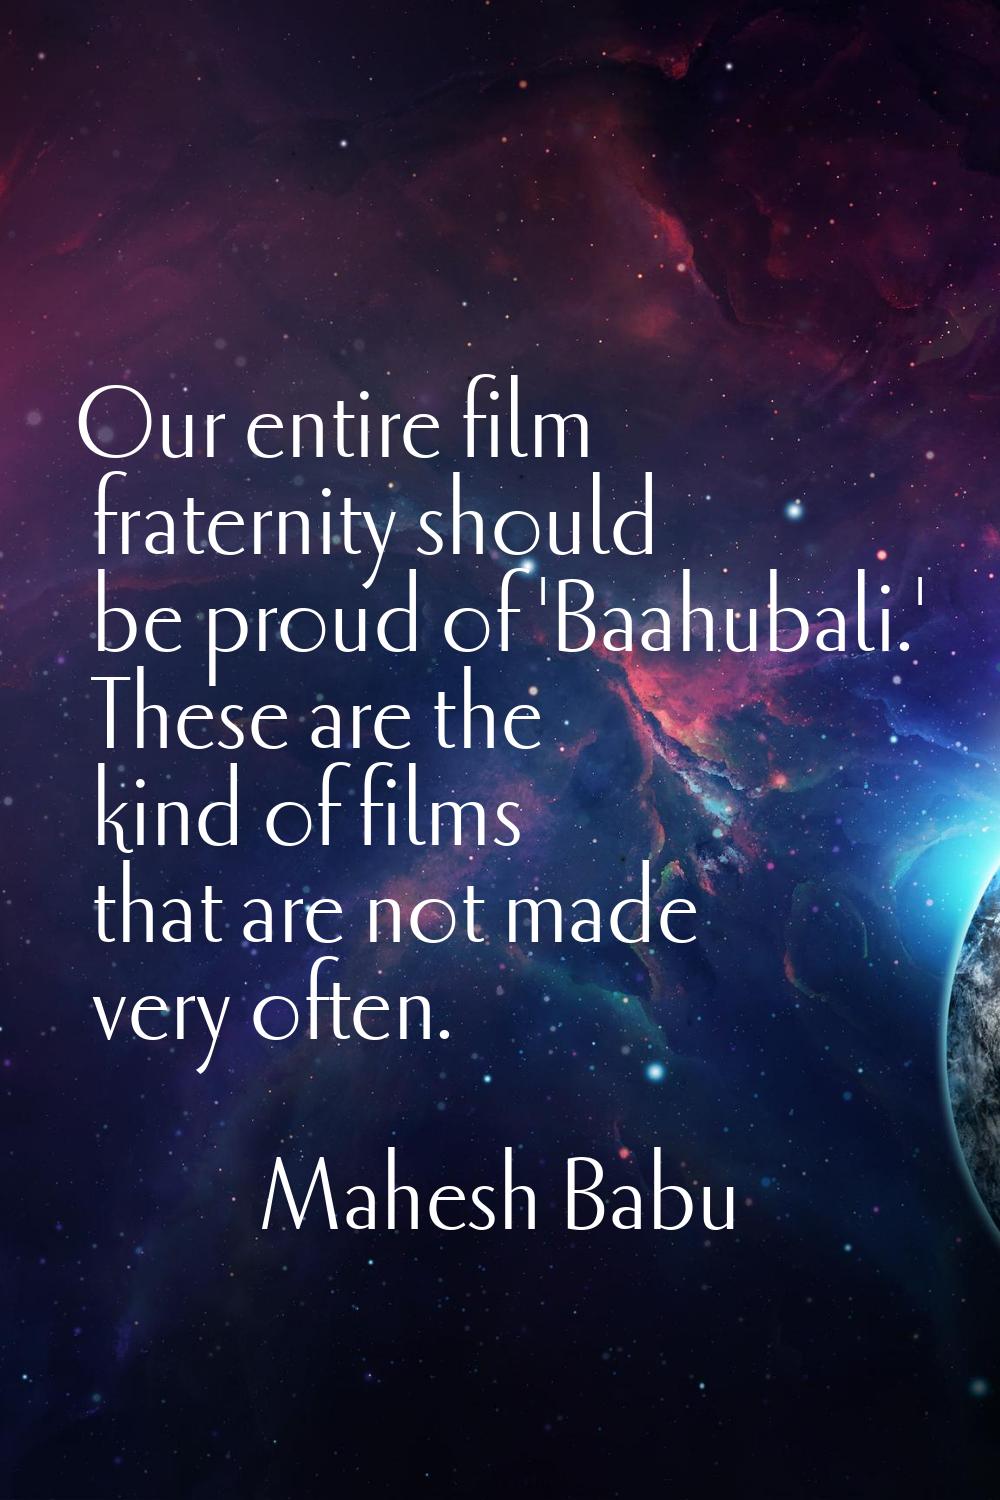 Our entire film fraternity should be proud of 'Baahubali.' These are the kind of films that are not